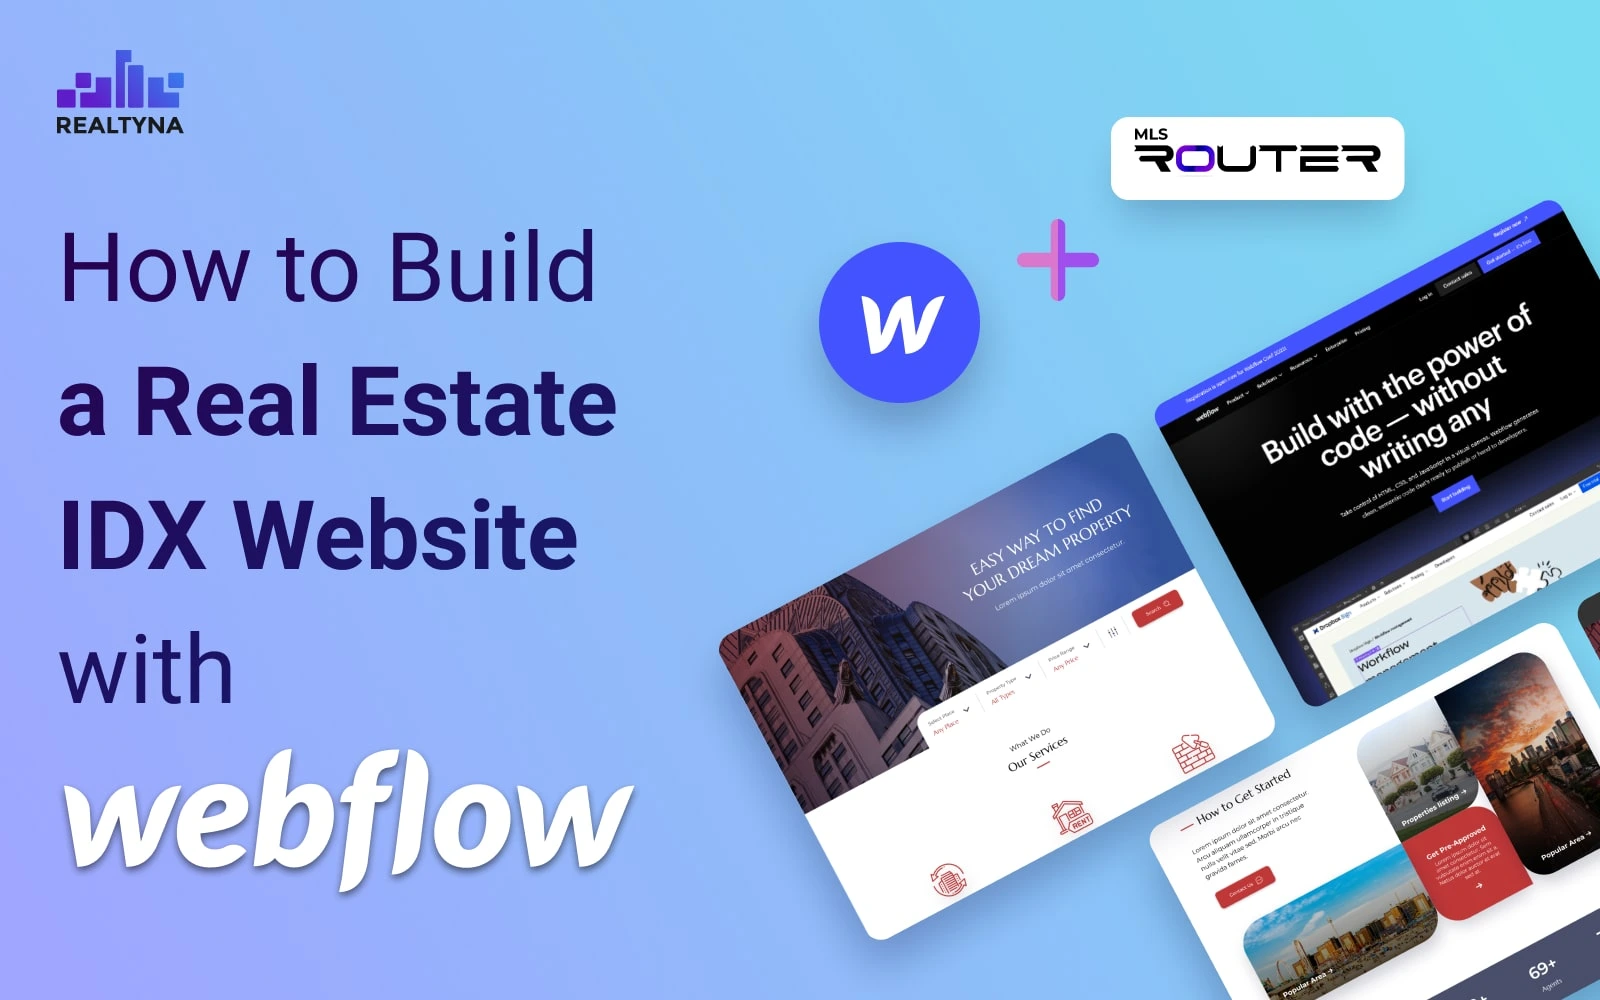 How to Build a Real Estate IDX Website with Webflow